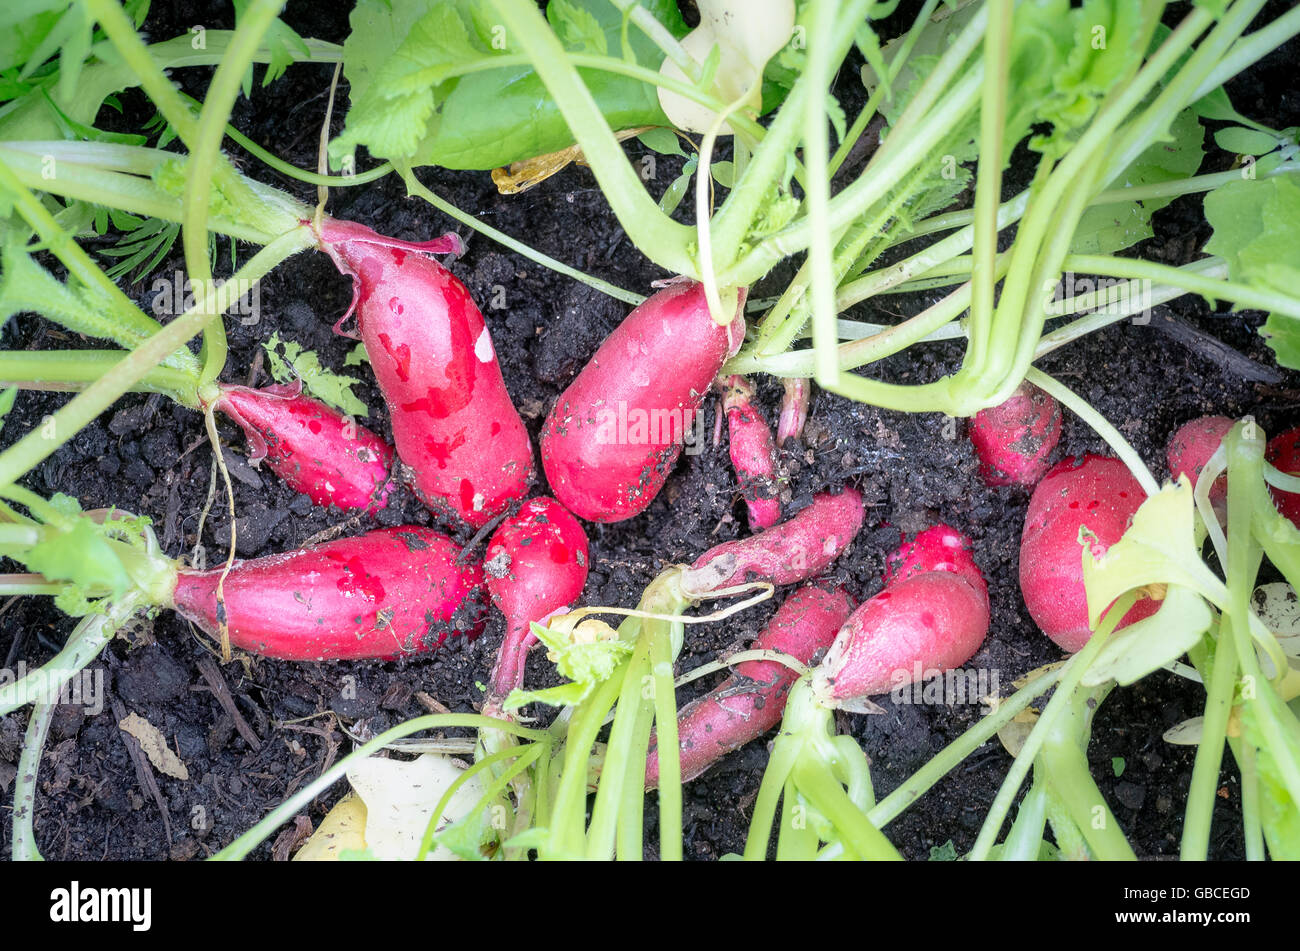 Radishes growing and ready for picking for a salad Stock Photo